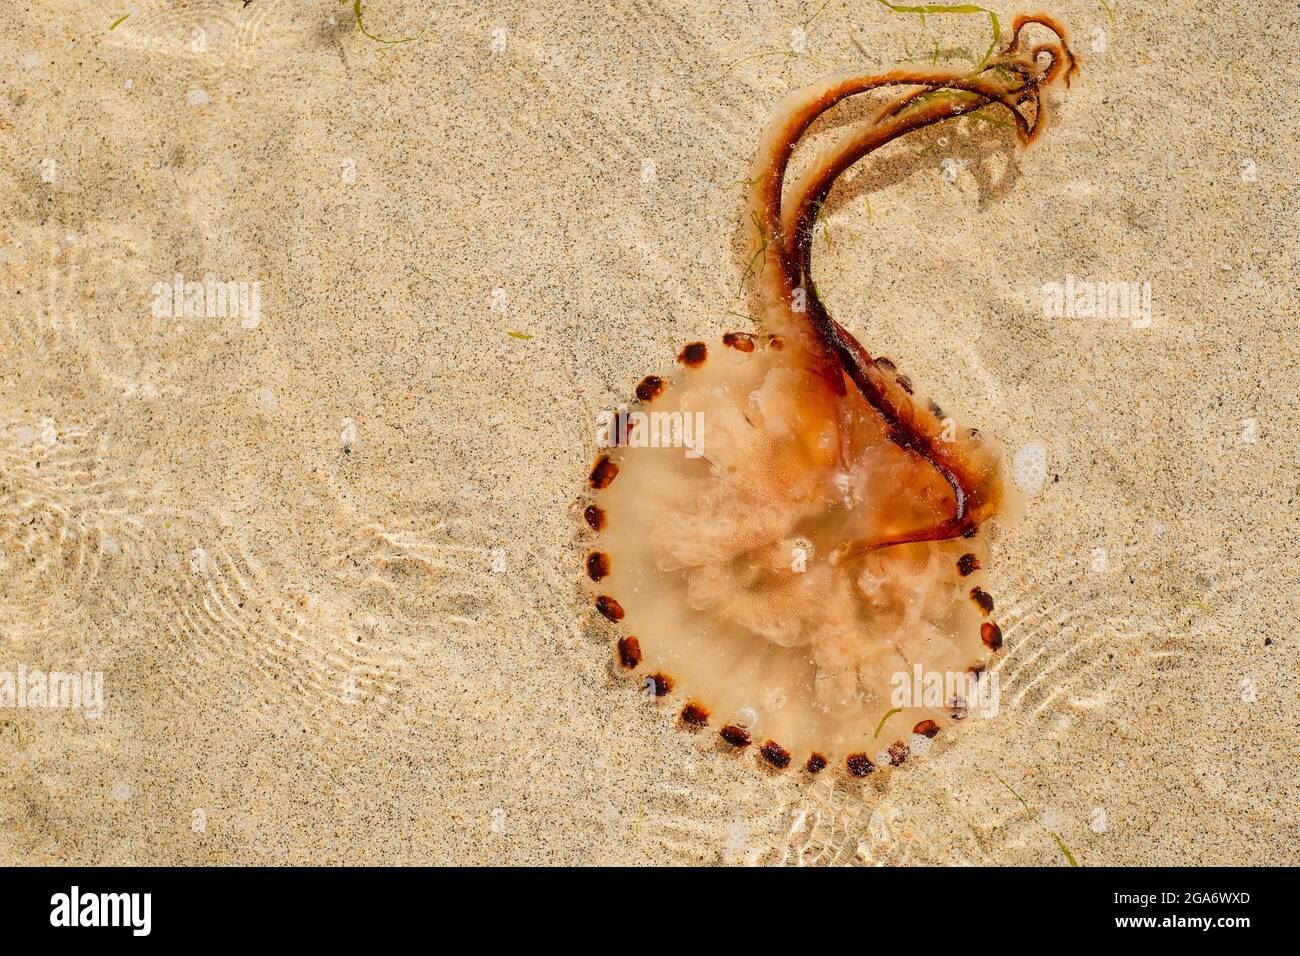 Compass Jellyfish on a UK beach in Summer Stock Photo